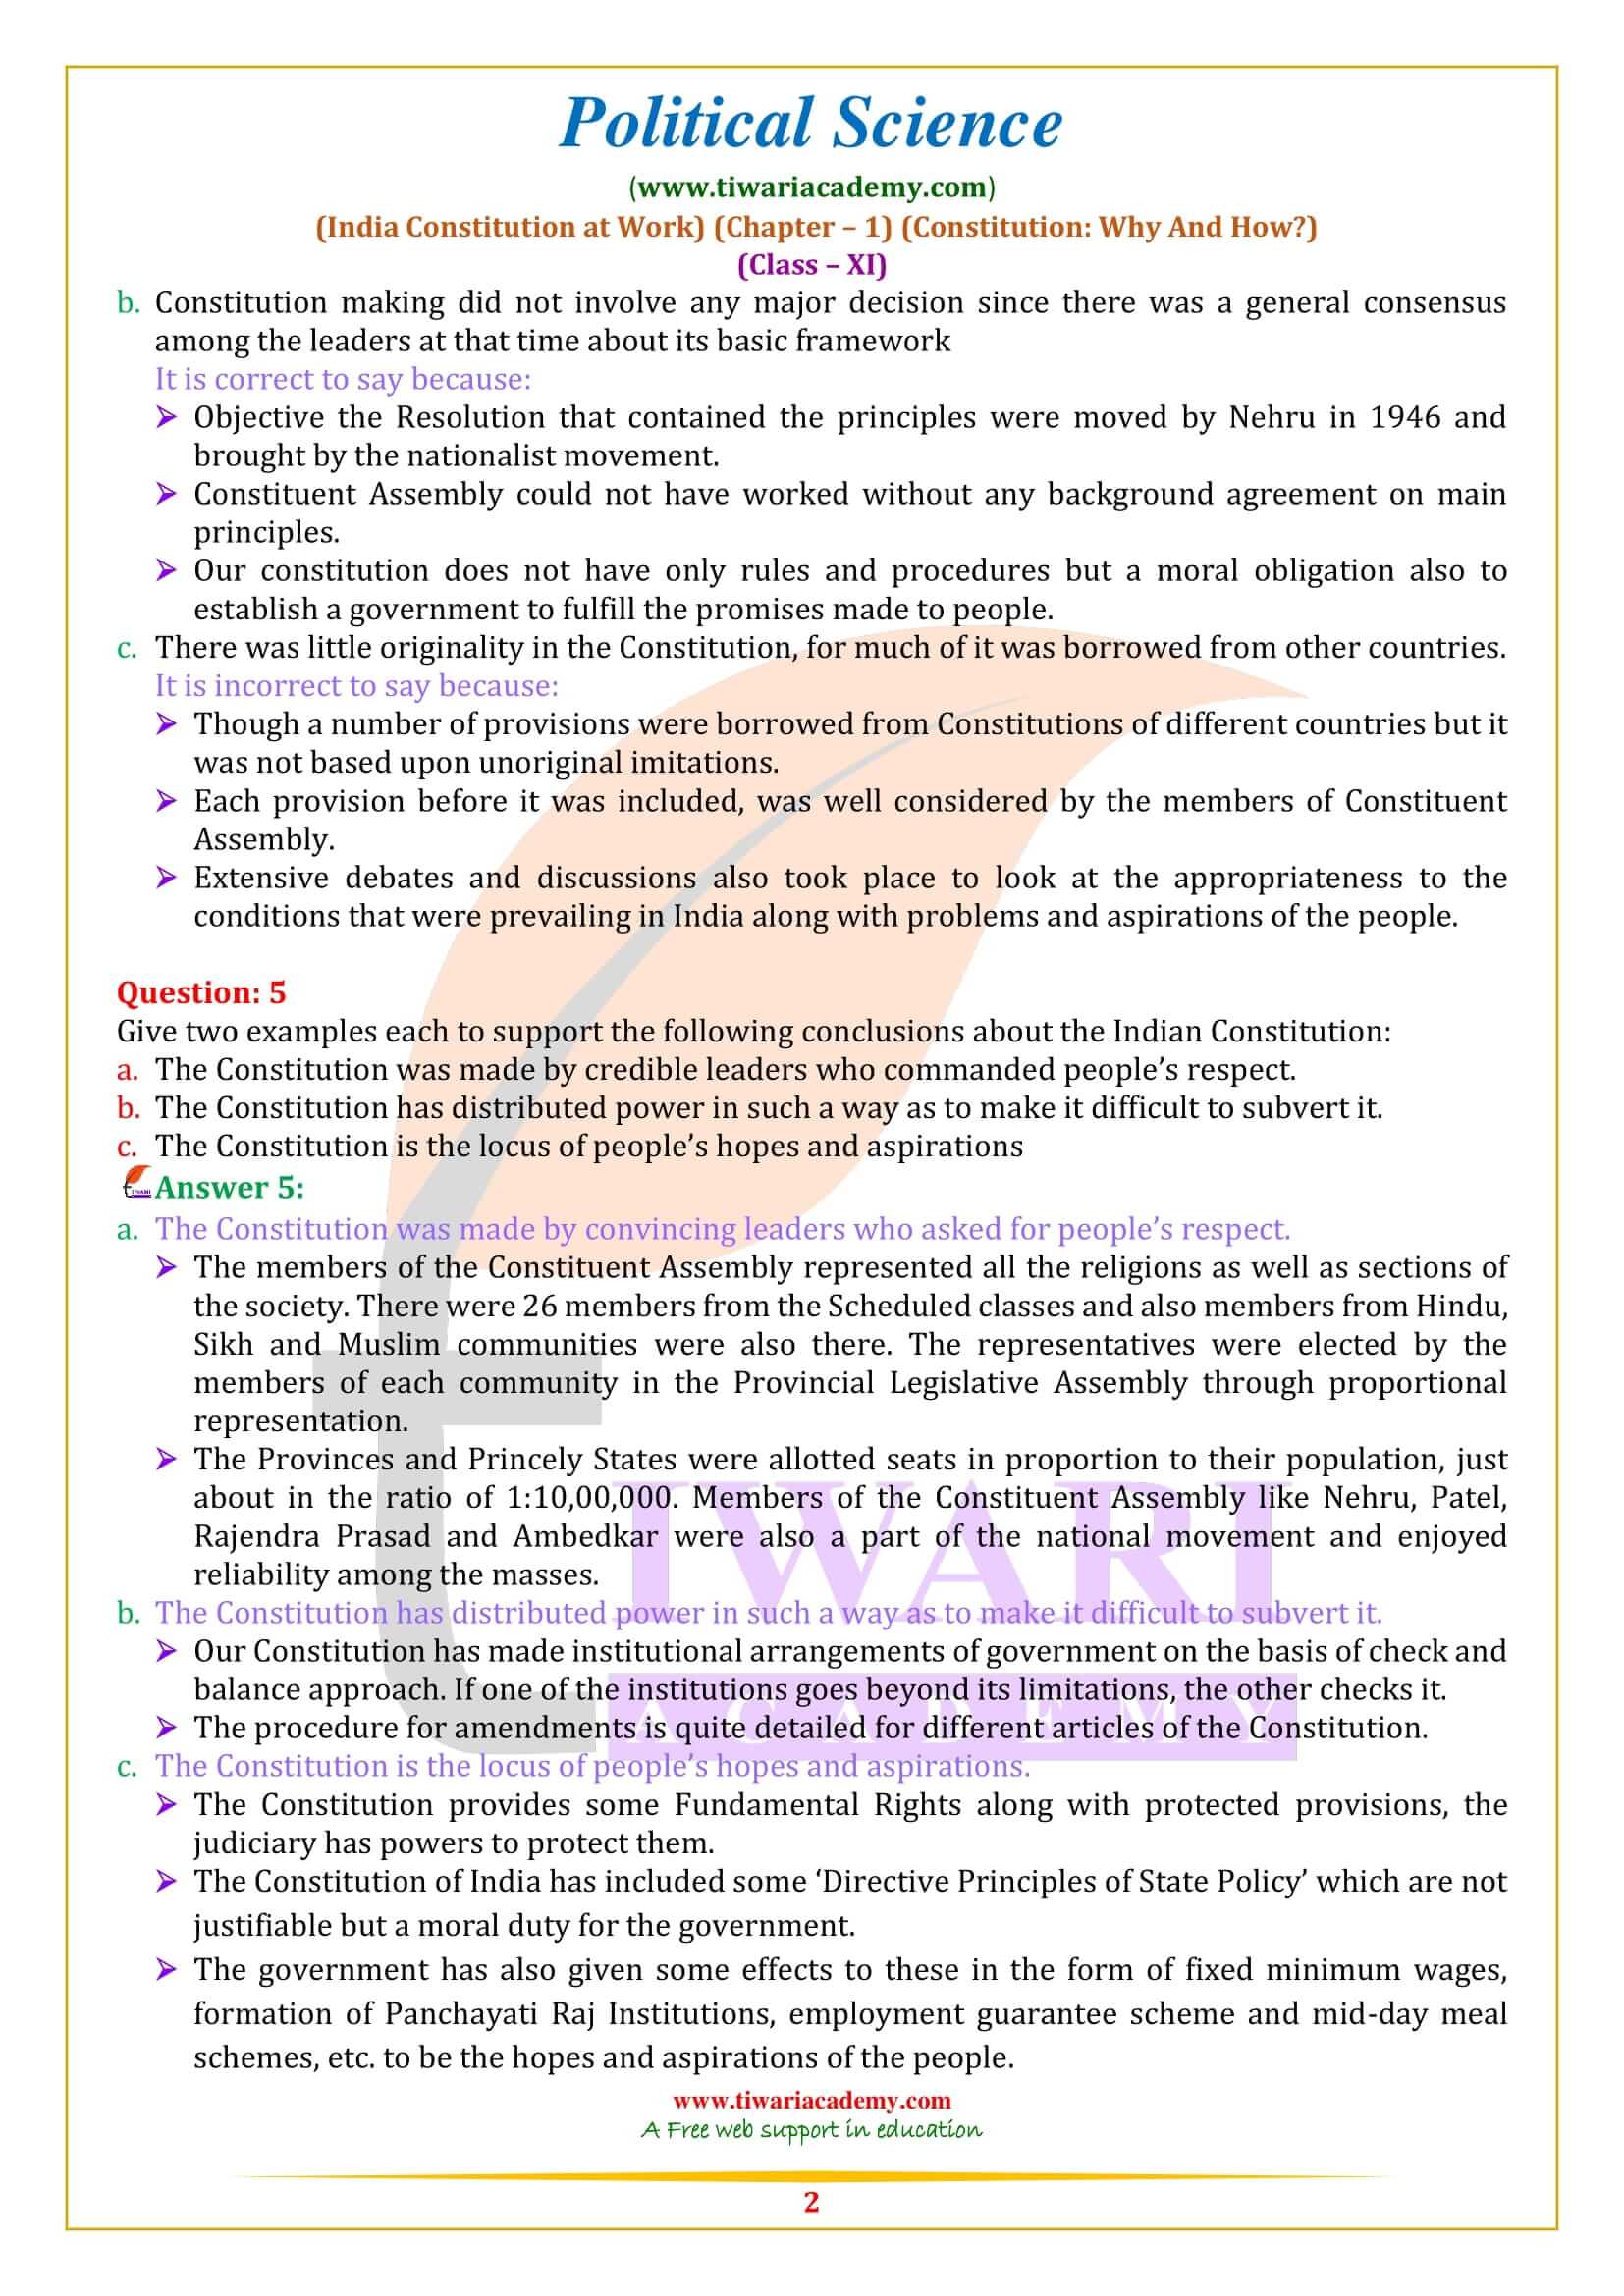 NCERT Solutions for Class 11 Political Science Chapter 1